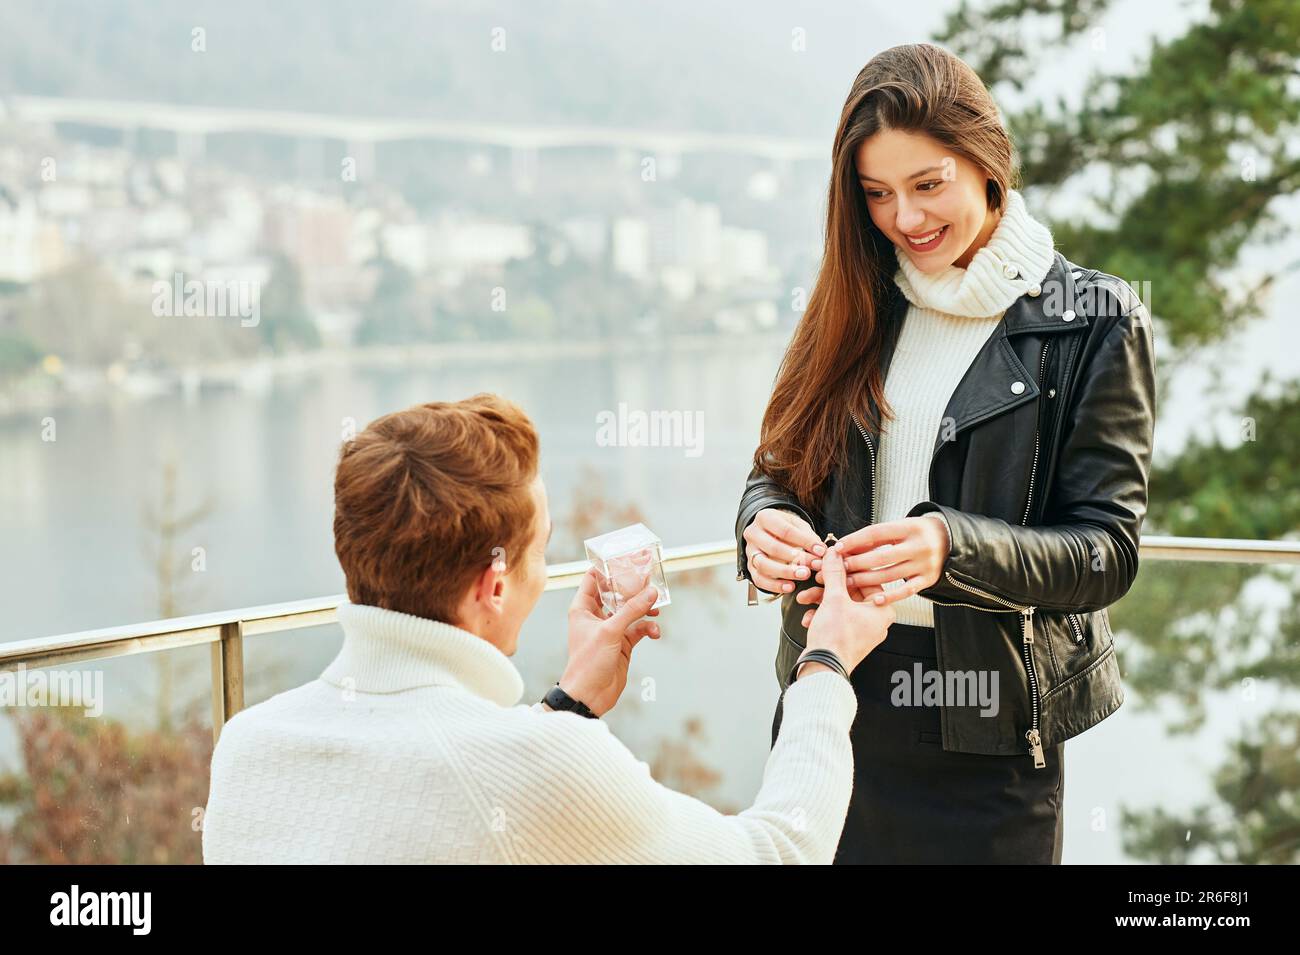 Young man with engagement ring making proposal to his girlfriend Stock Photo